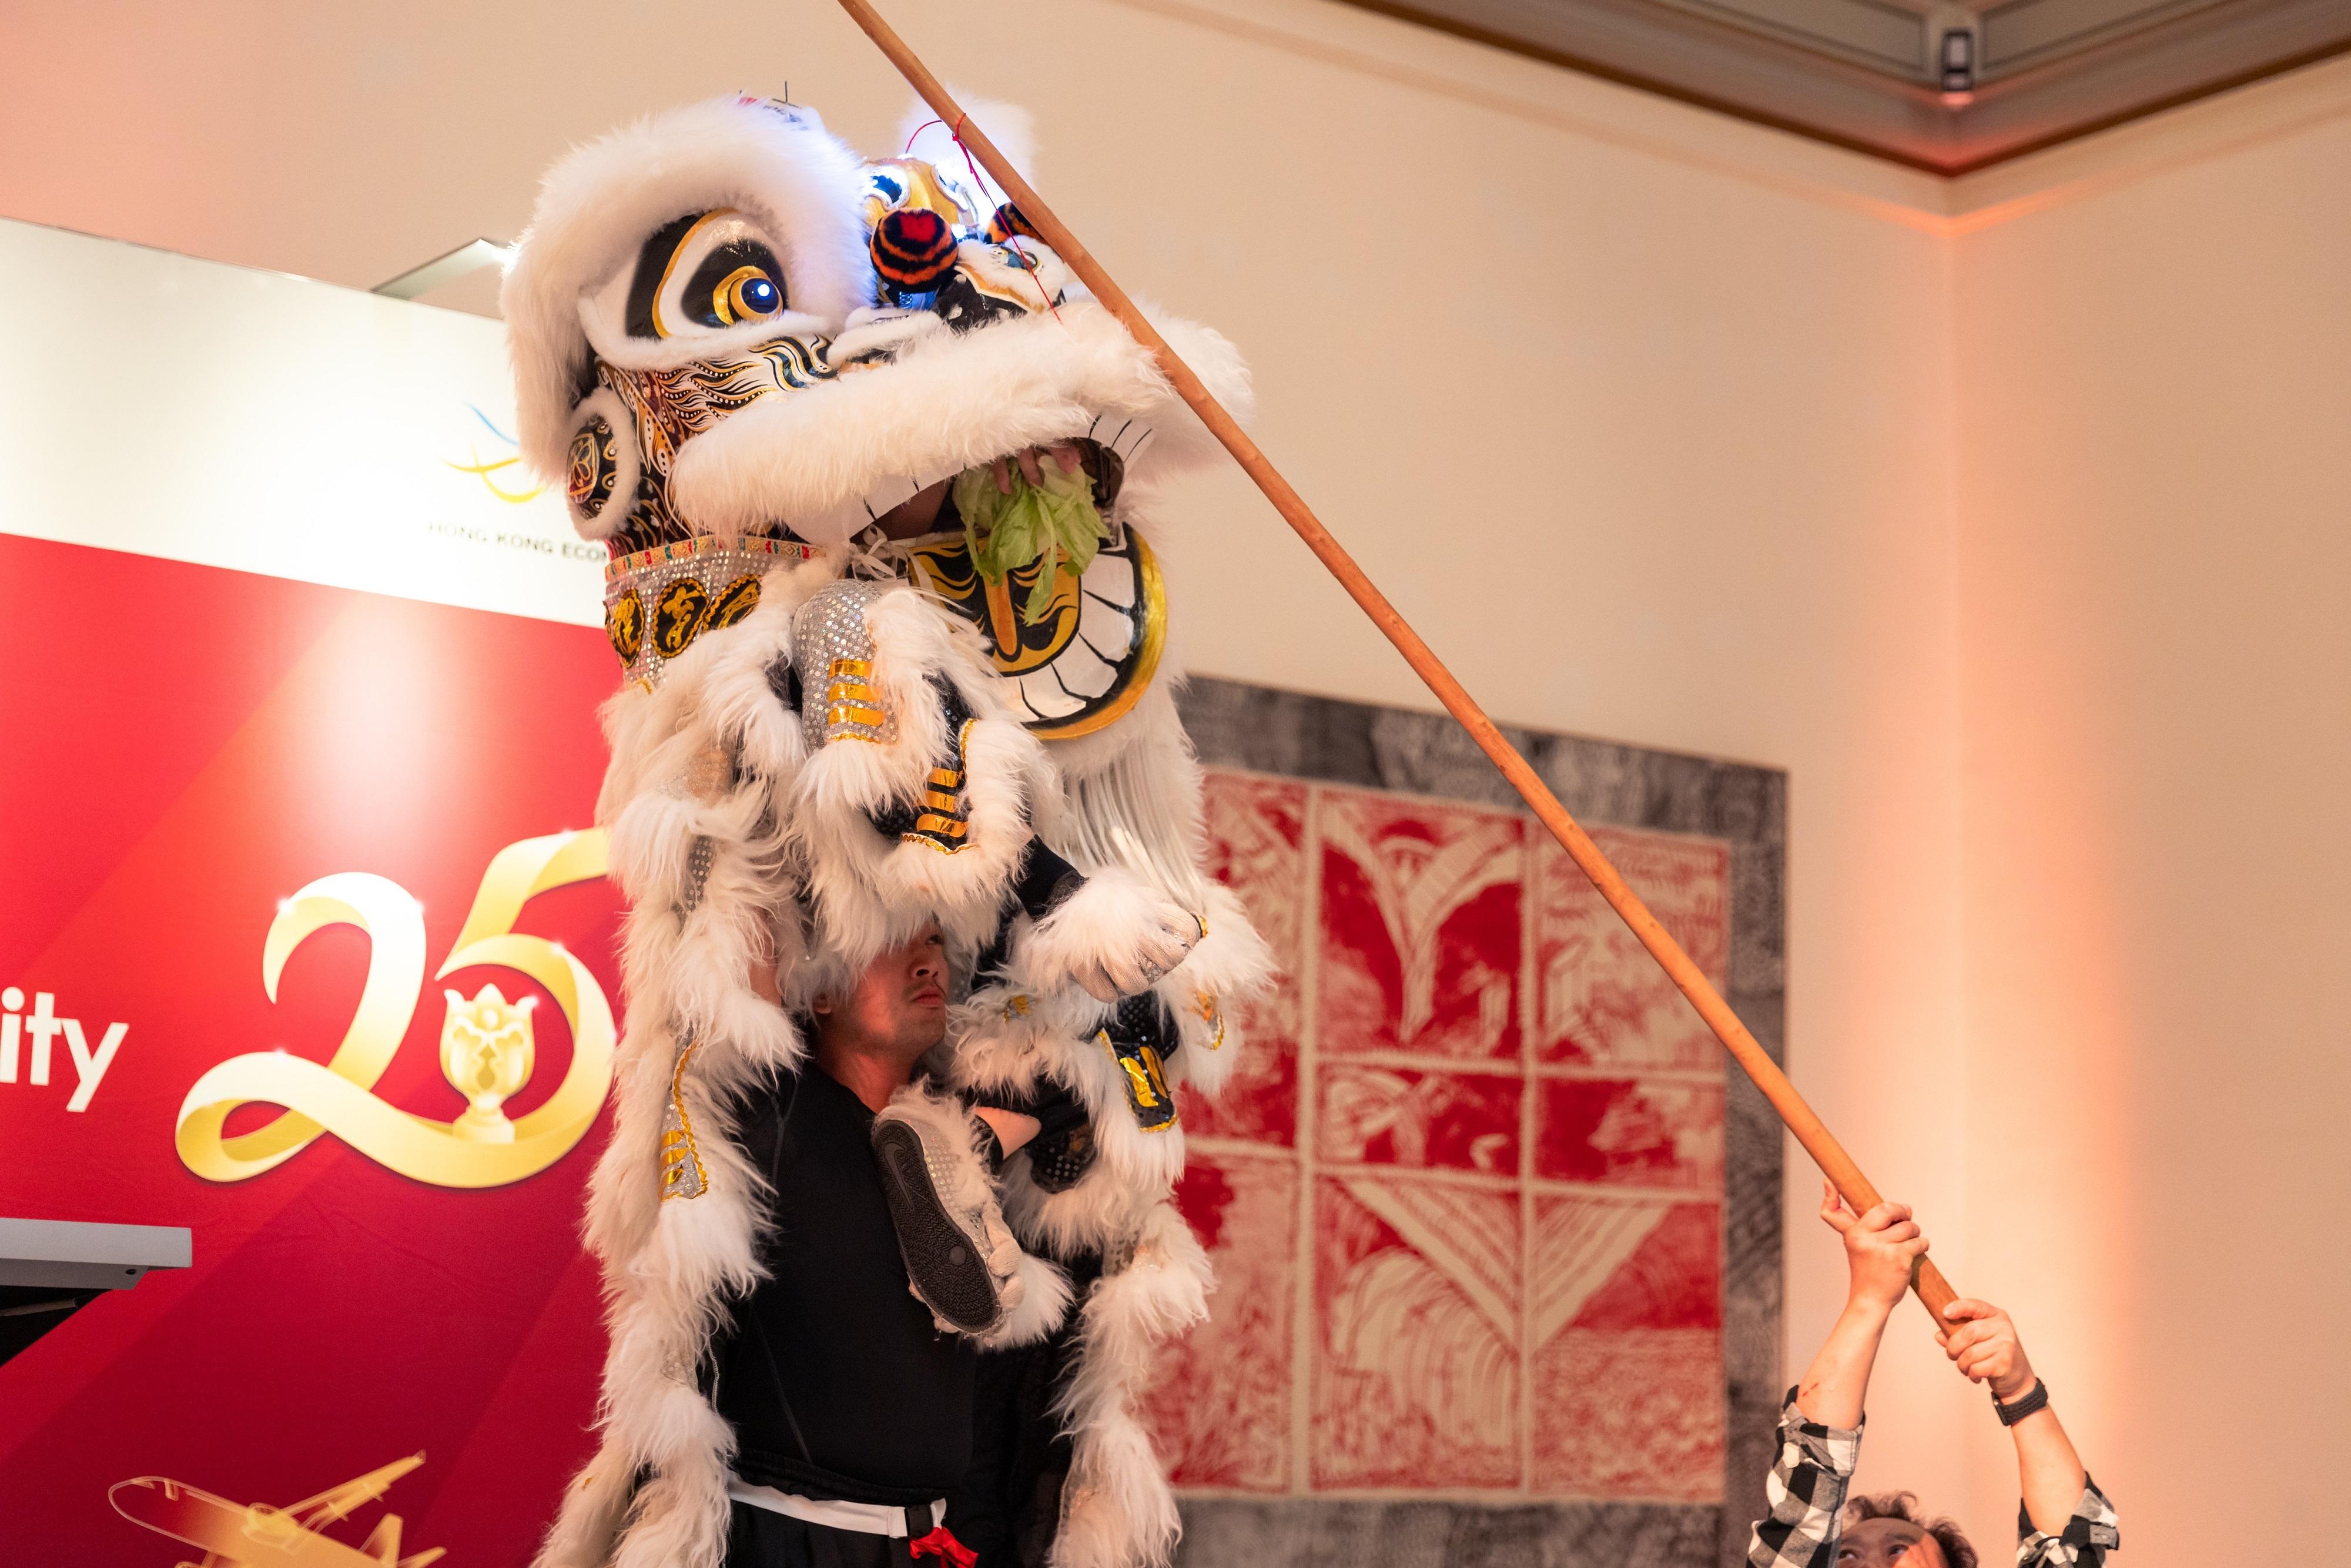 The Hong Kong Economic and Trade Office in Brussels treats guests to a lion dance performance at a gala event to celebrate the 25th anniversary of the establishment of the Hong Kong Special Administrative Region held at the Royal Museum of Fine Arts of Belgium in Brussels, Belgium, on June 30 (Brussels time).